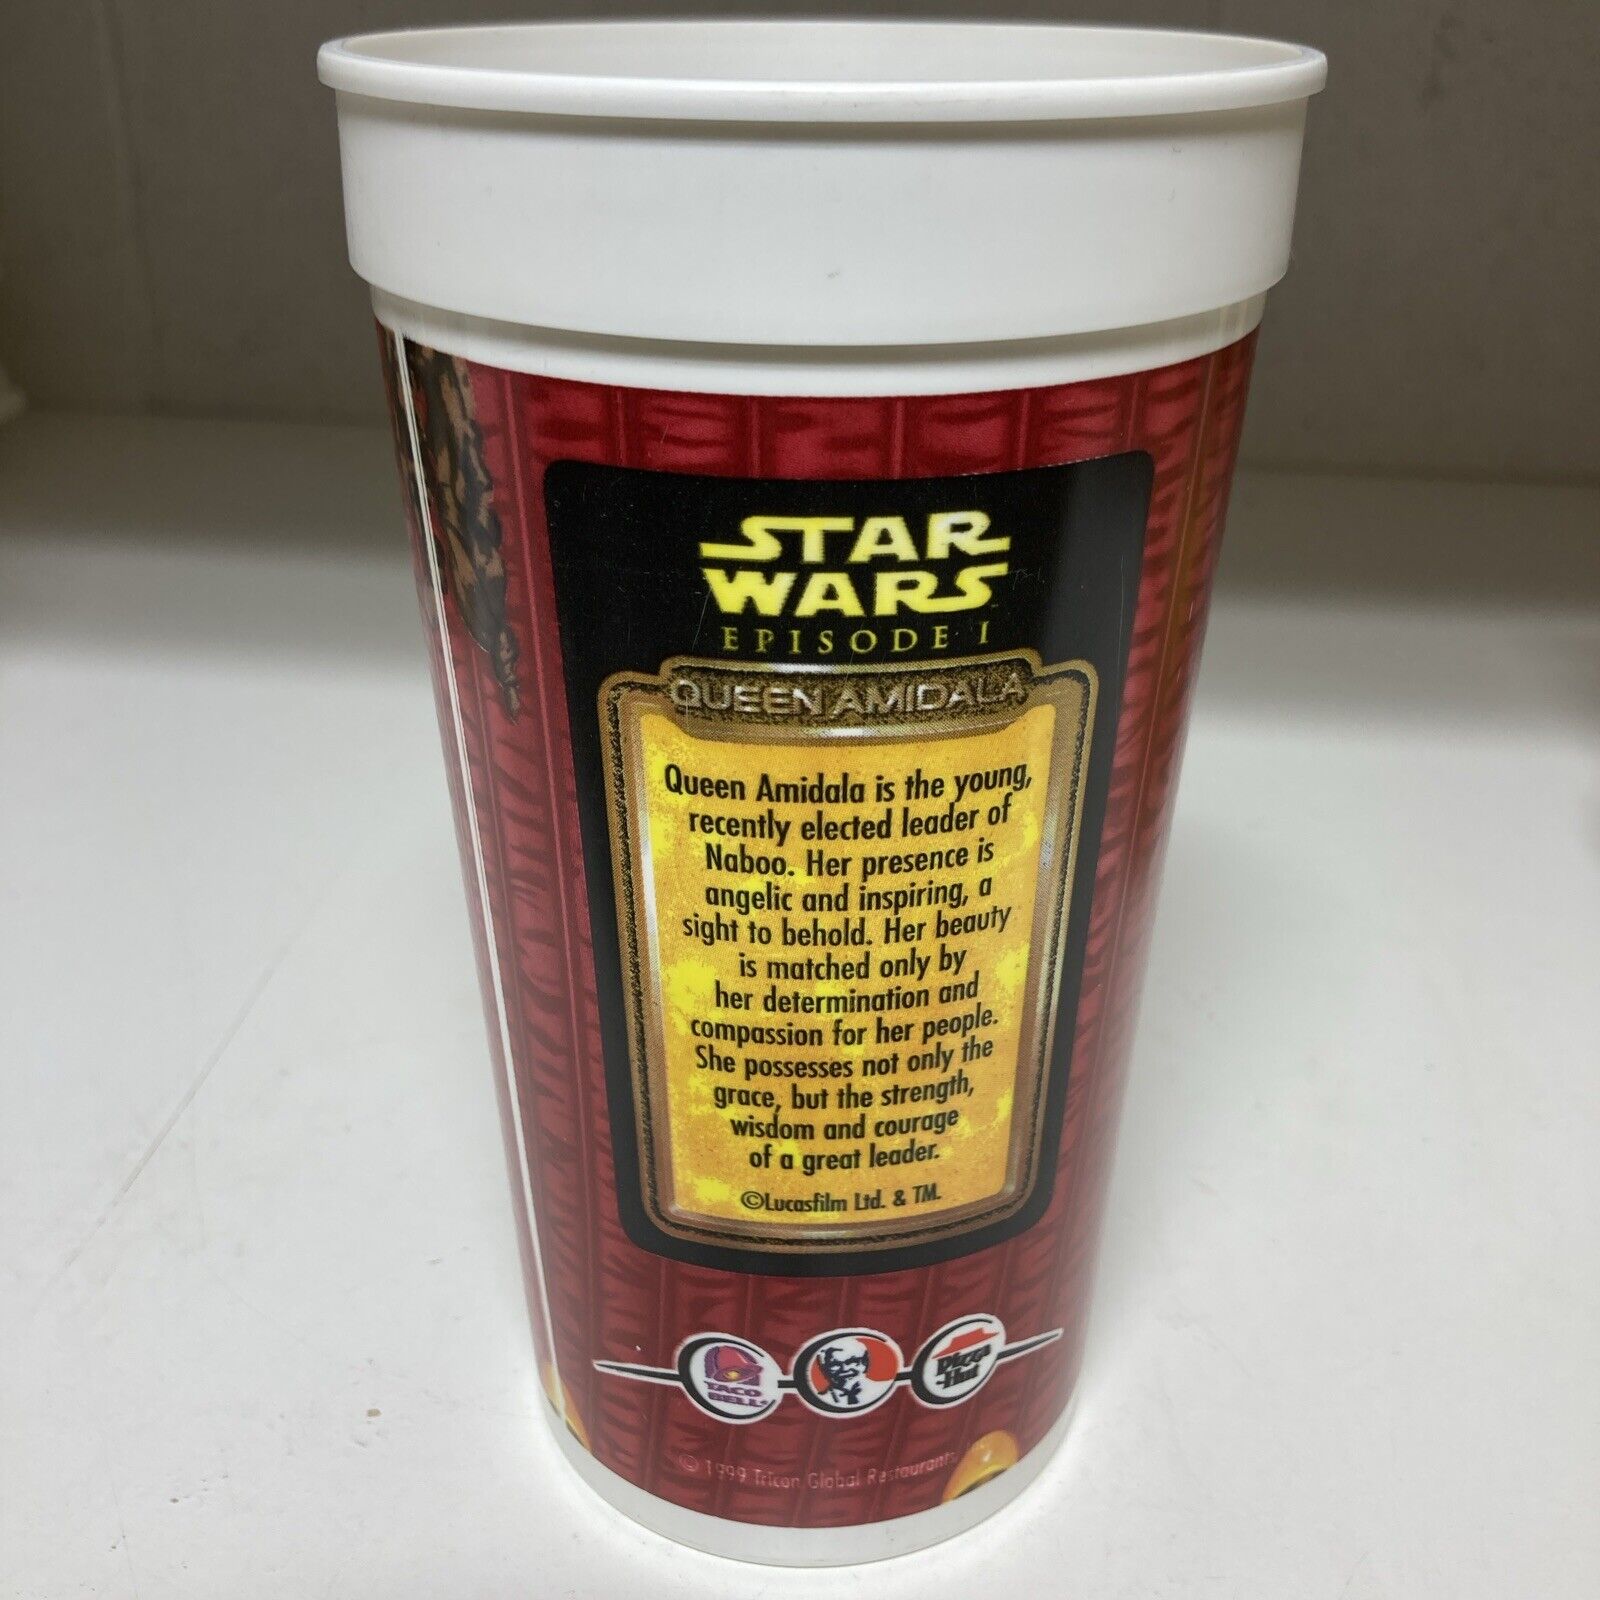 VTG Collect 1999 KFC Pizza Hut Taco Bell Star Wars Episode 1 Cup Queen Amidala